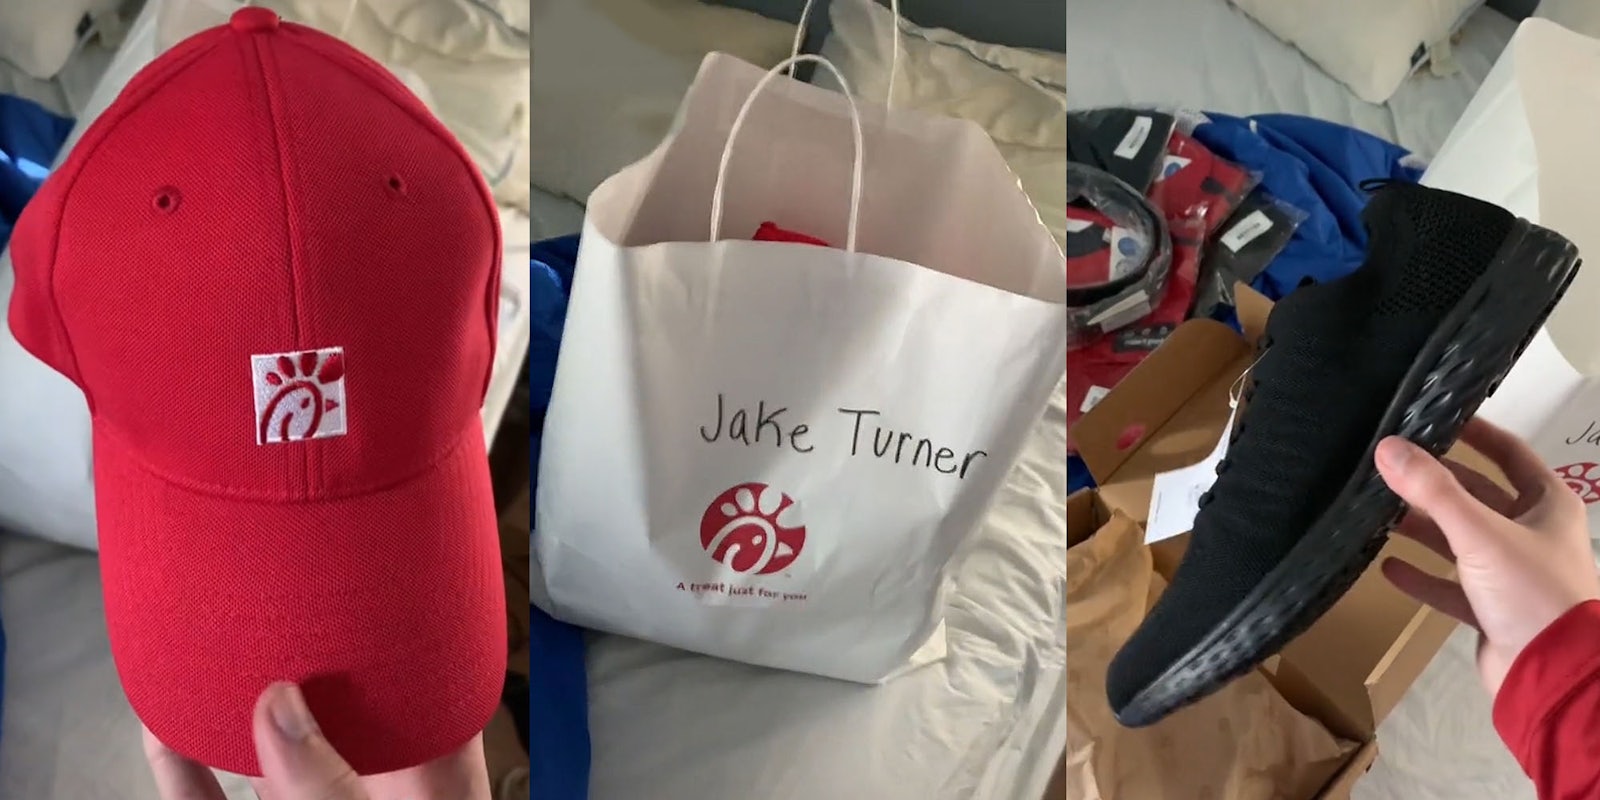 Man holding chick fil a branded hat in bedroom (l) white bag on bed with name Jake Turner written in sharpie on side sitting on bed (c) Man hand holding shoe above other clothing items on bed (r)